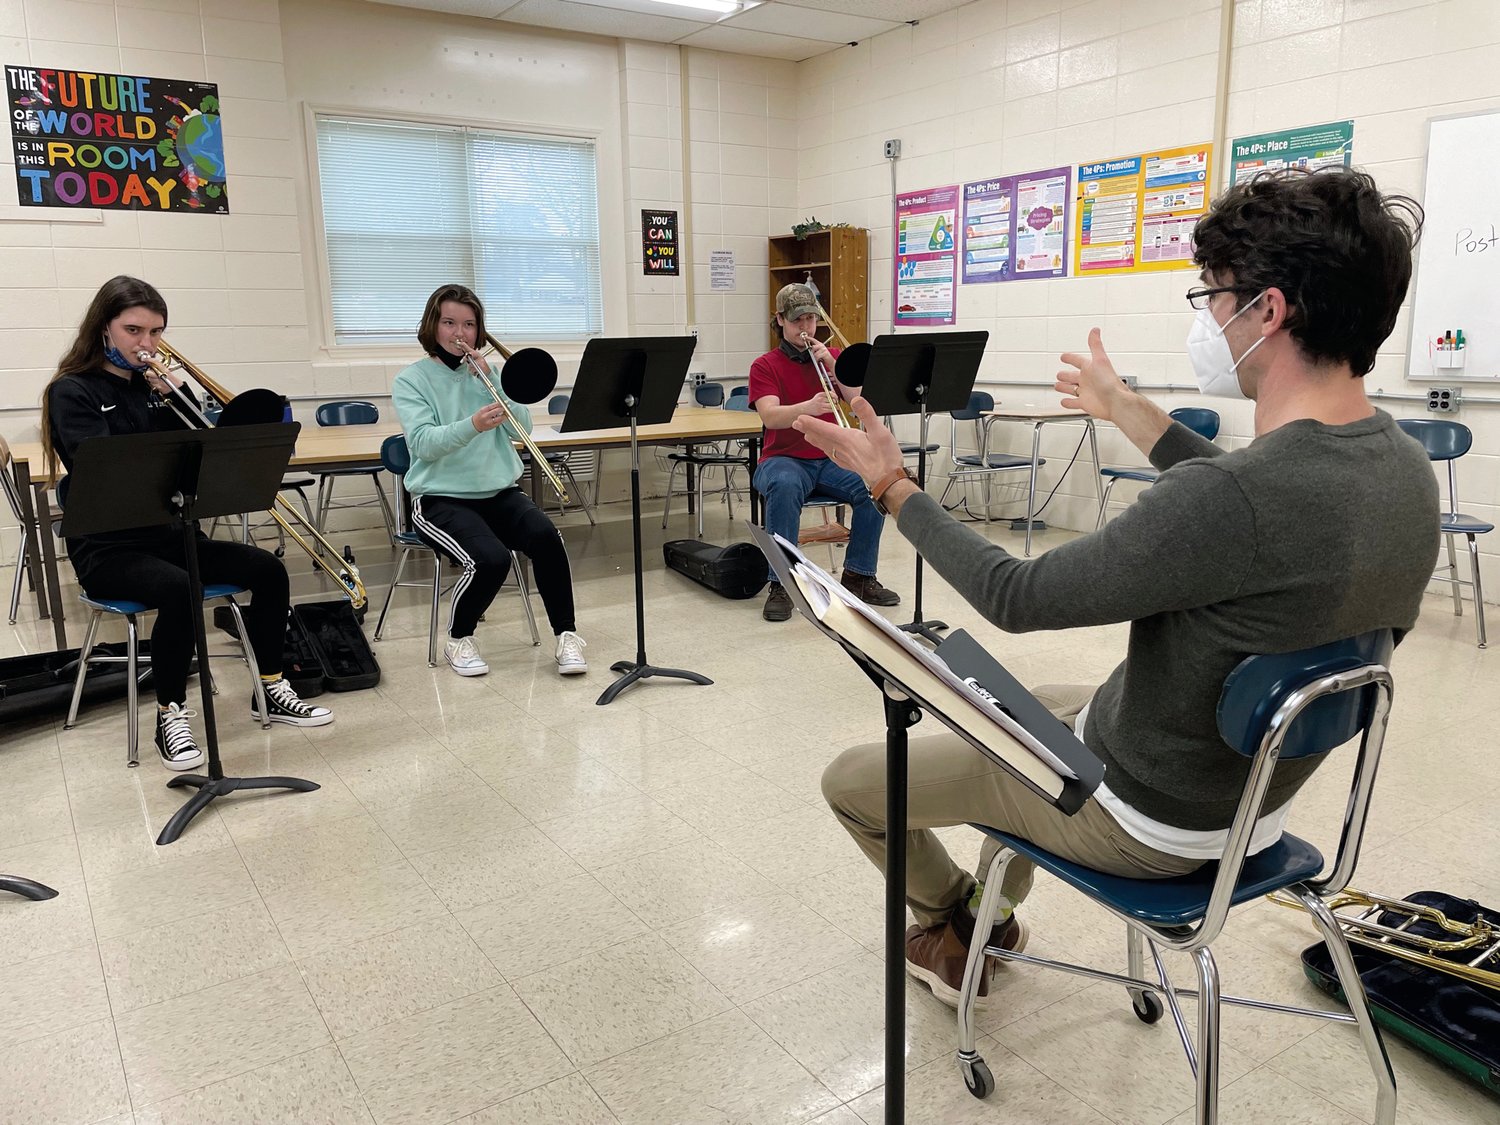 Trombonist and bassist Andy Kleindienst of La Fiesta Latin Jazz Sextet leads Maggie Thornton, Emma Wieber and Gavin Campbell in a Latin jazz session for student trombonists at Jordan-Matthews on Jan. 28.